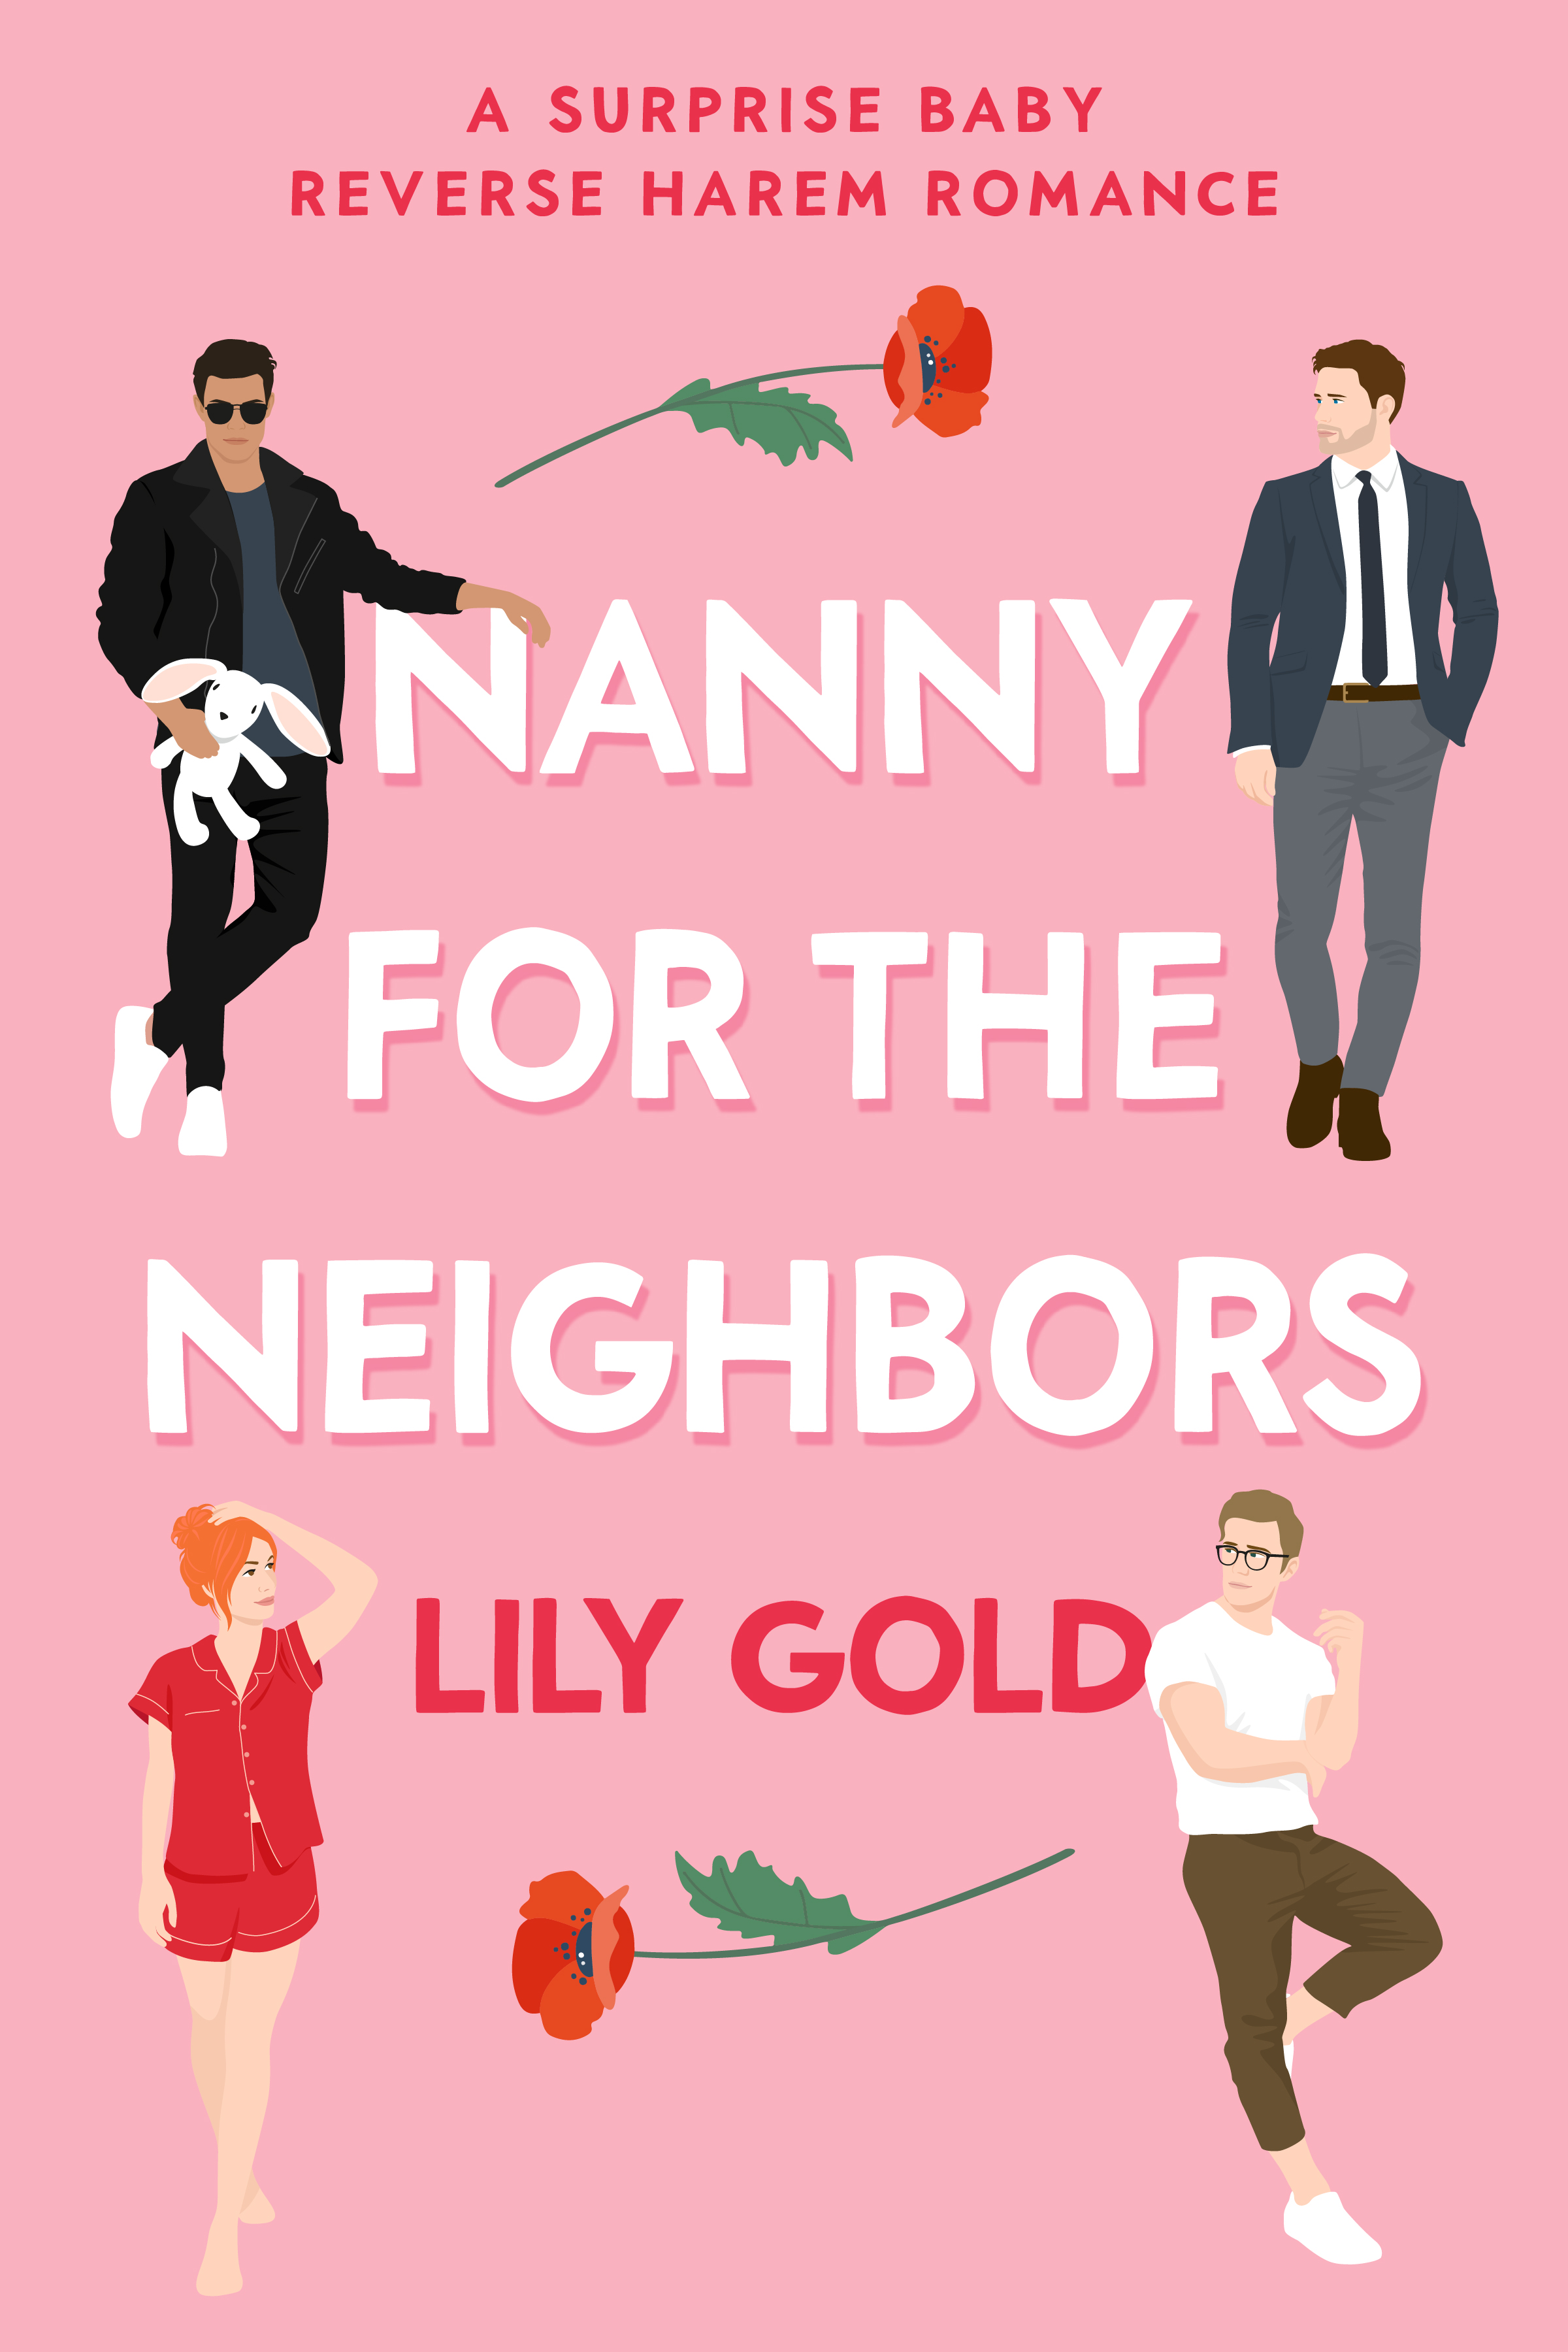 Nanny for the Neighbors: A Surprise Baby Reverse Harem Romance by Lily Gold Review/Summary